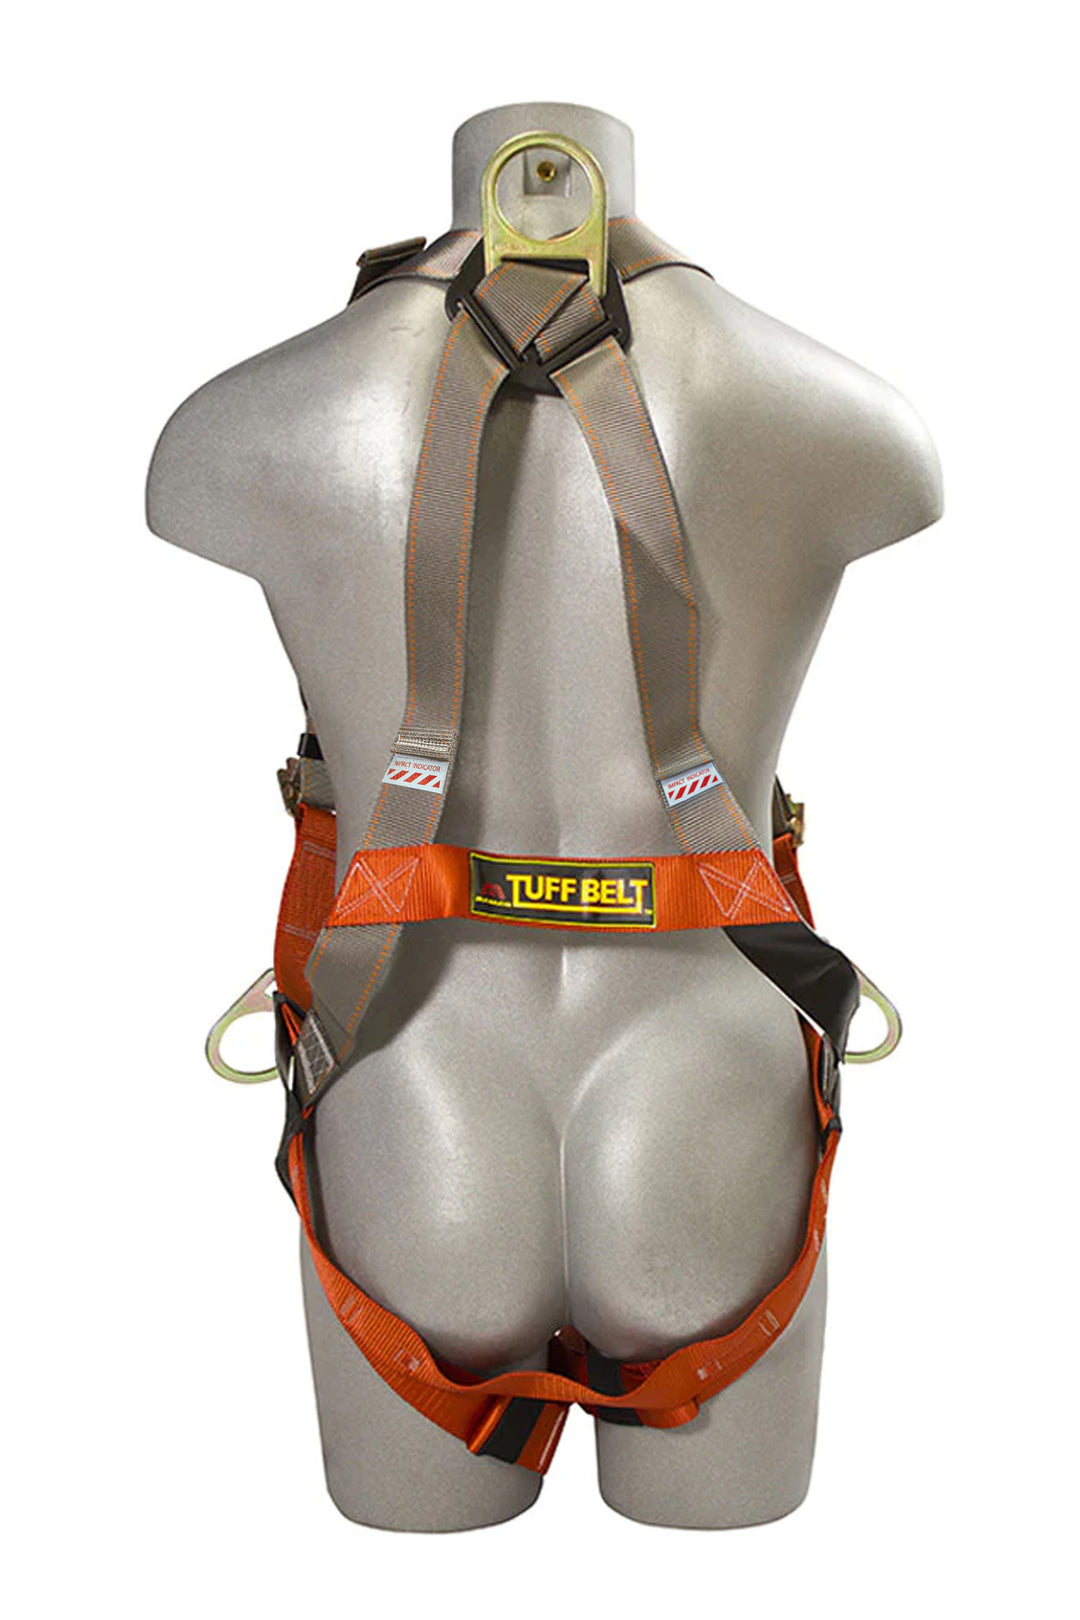 Pro-Tuff 5-Point Resilient Full Body Harness / H-TB205B